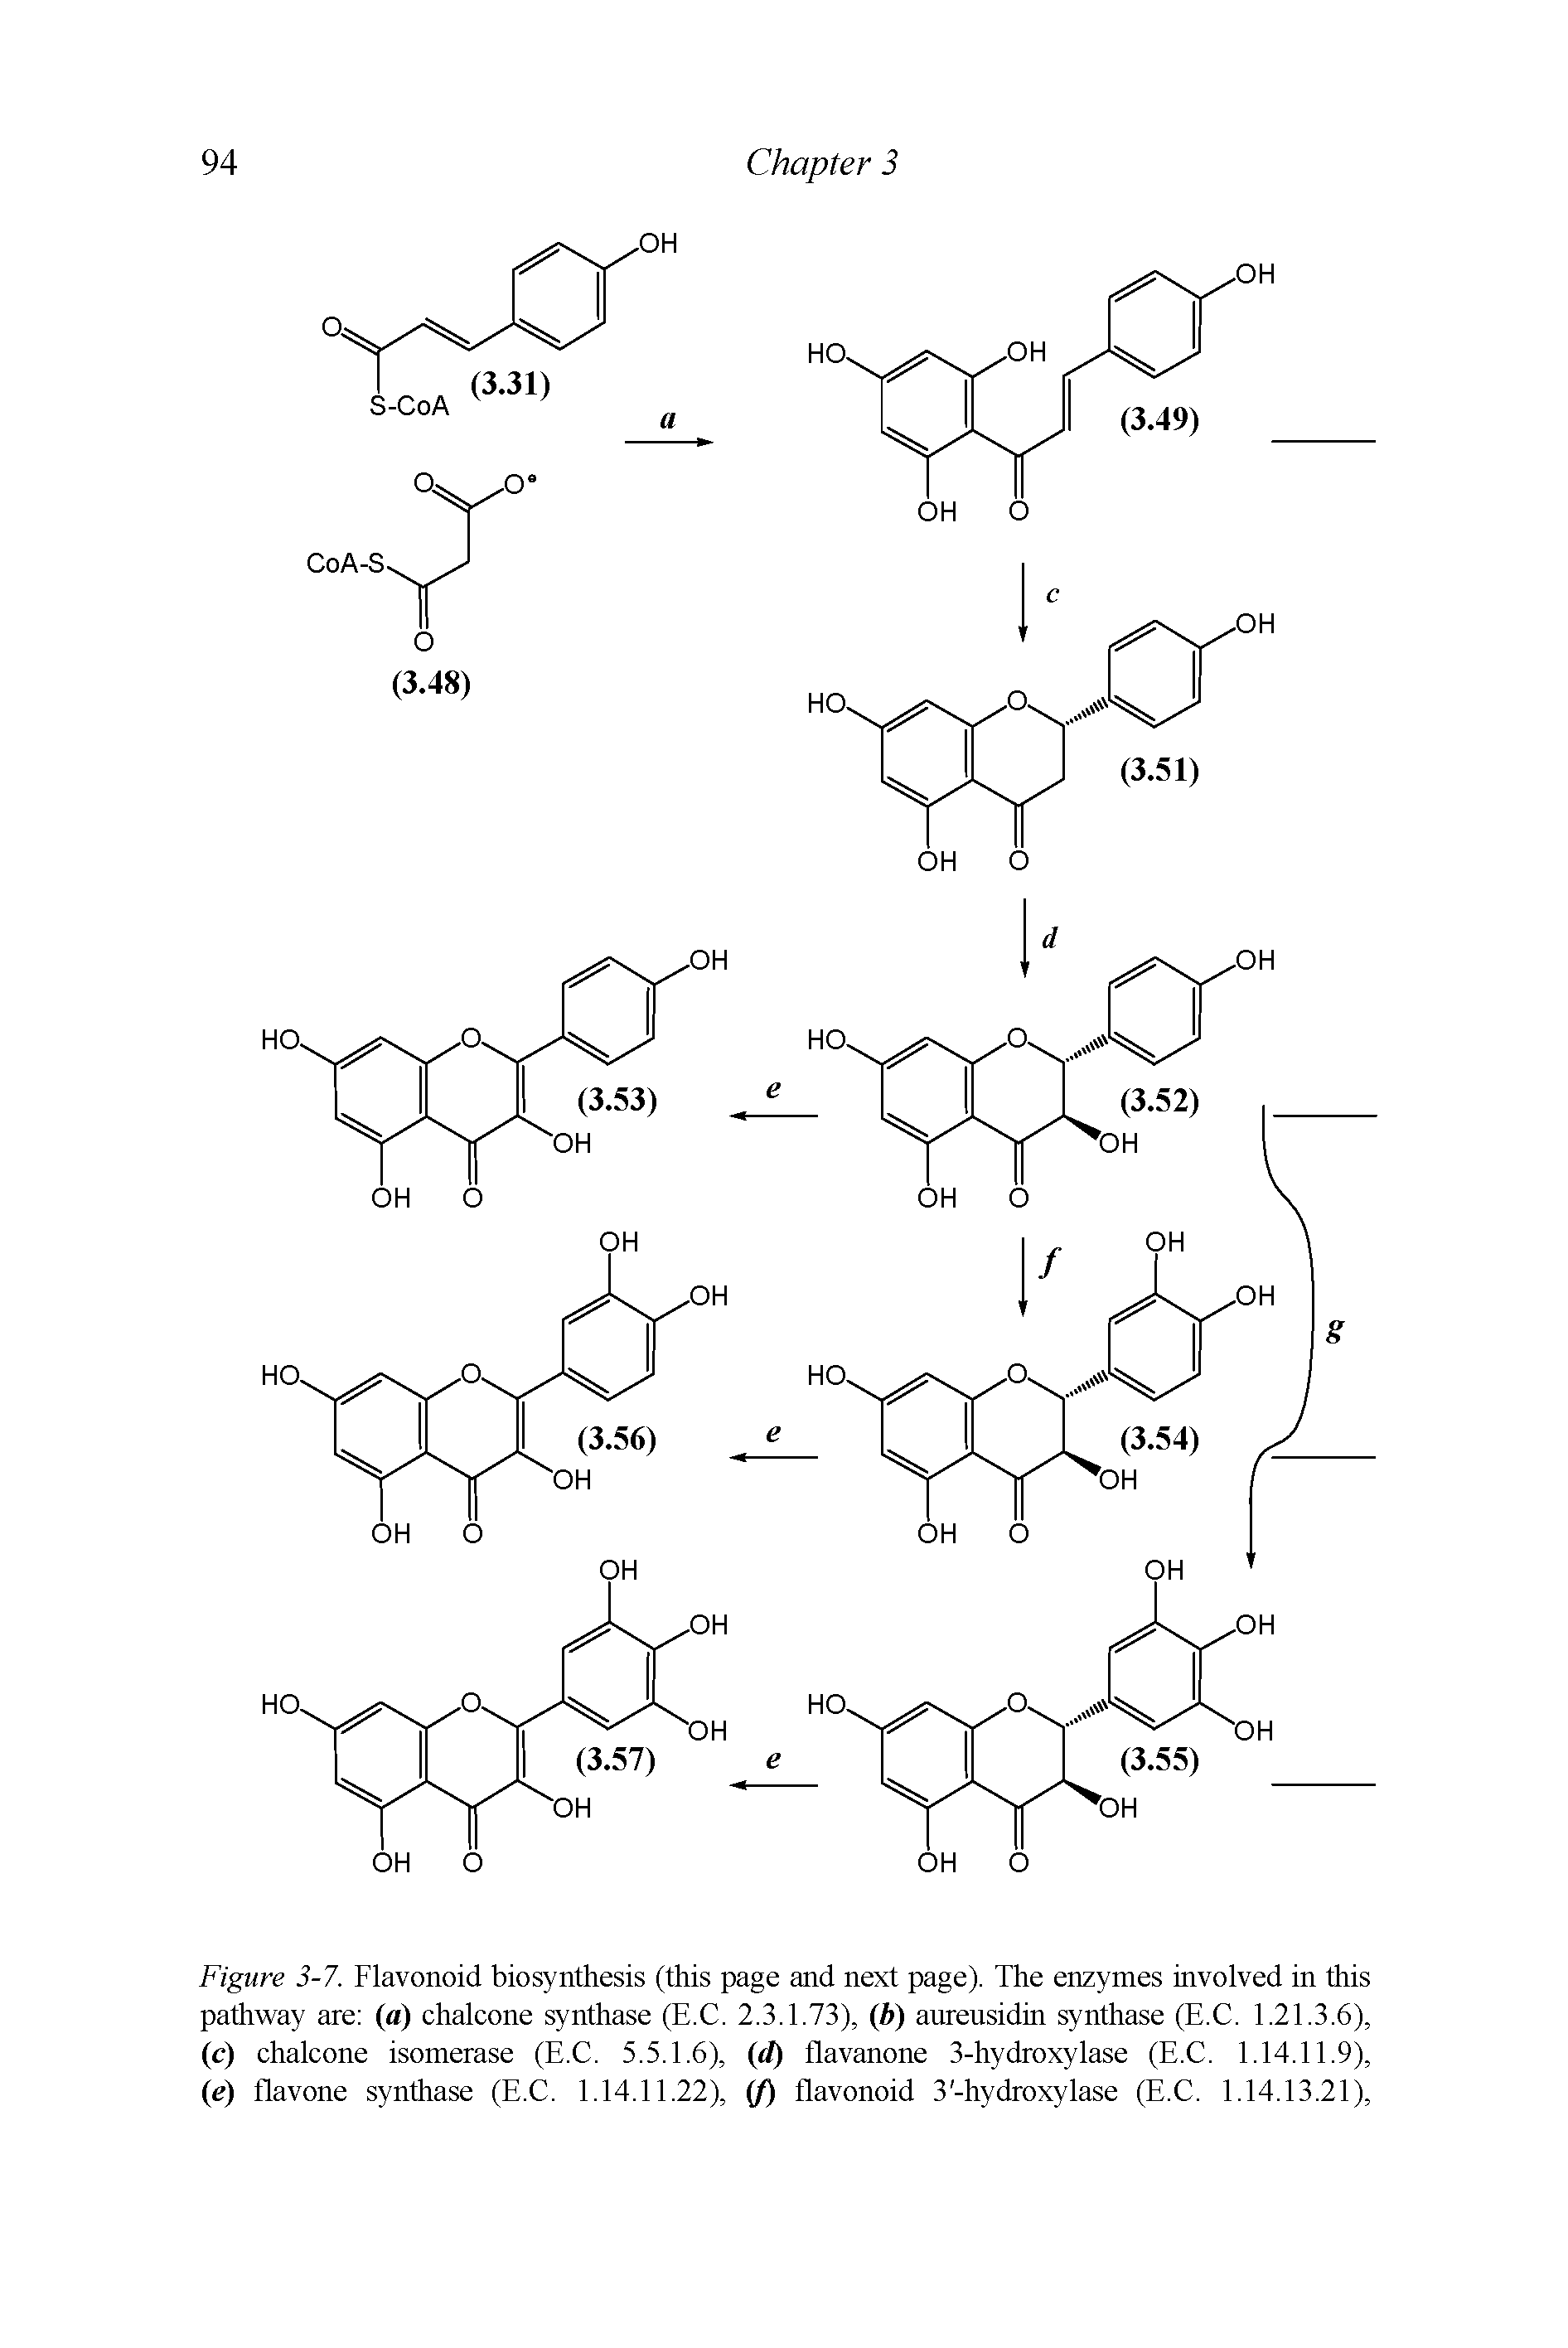 Figure 3-7. Flavonoid biosynthesis (this page and next page). The enzymes involved in this pathway are (a) chalcone synthase (E.C. 2.3.1.73), (b) aureusidin synthase (E.C. 1.21.3.6), (c) chalcone isomerase (E.C. 5.5.1.6), (d) flavanone 3-hydroxylase (E.C. 1.14.11.9), (e) flavone synthase (E.C. 1.14.11.22), (f) flavonoid 3 -hydroxylase (E.C. 1.14.13.21),...